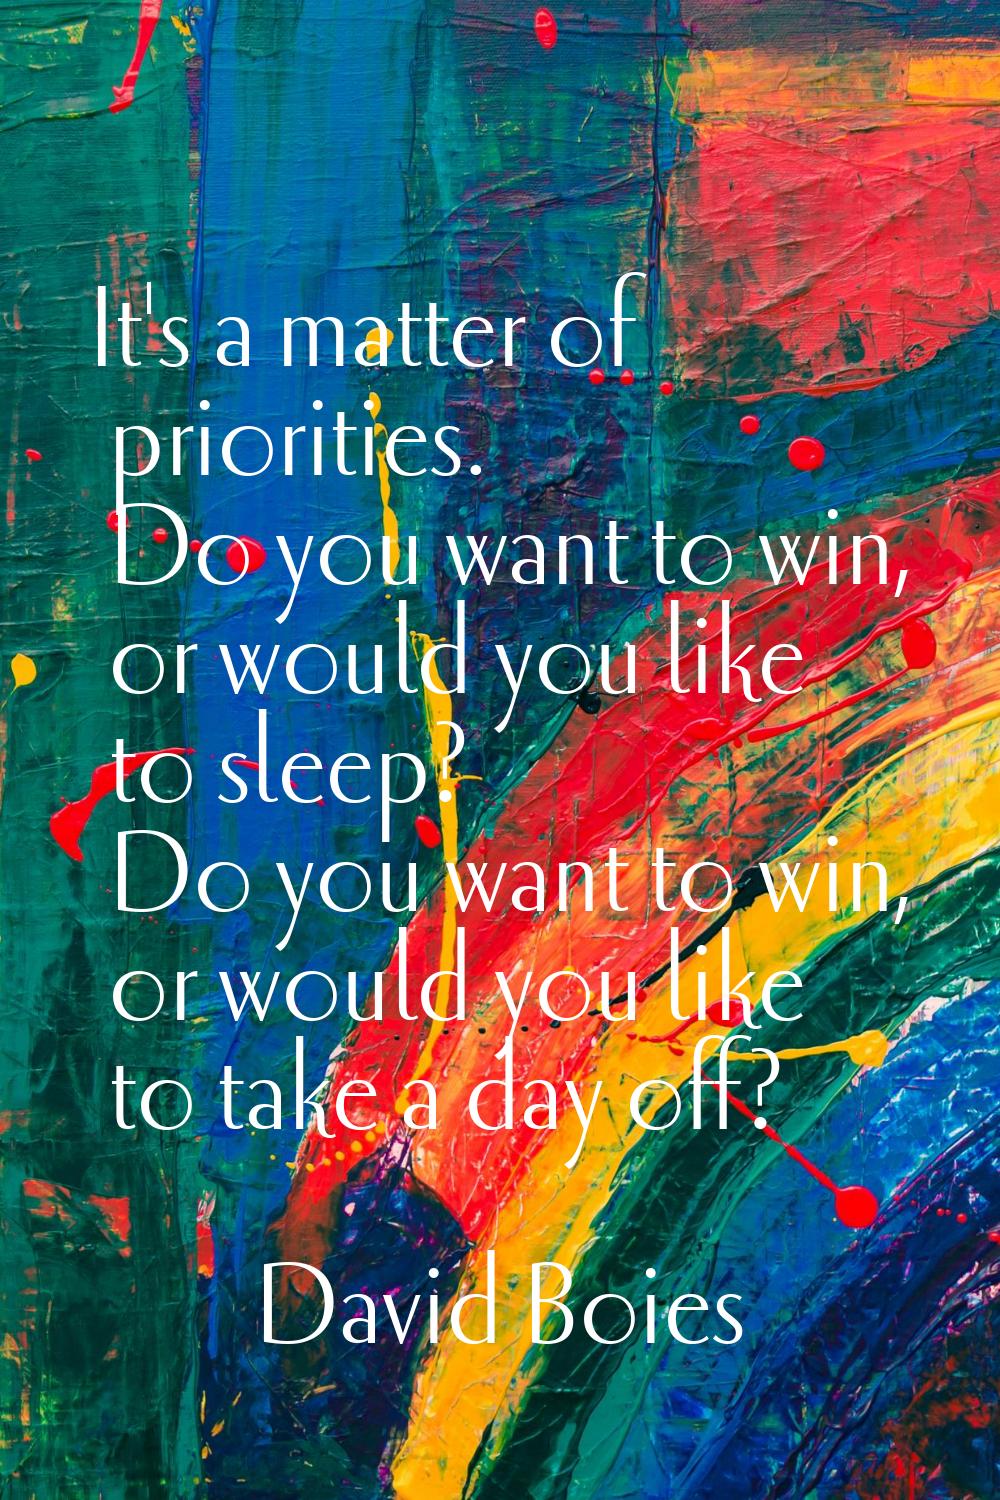 It's a matter of priorities. Do you want to win, or would you like to sleep? Do you want to win, or